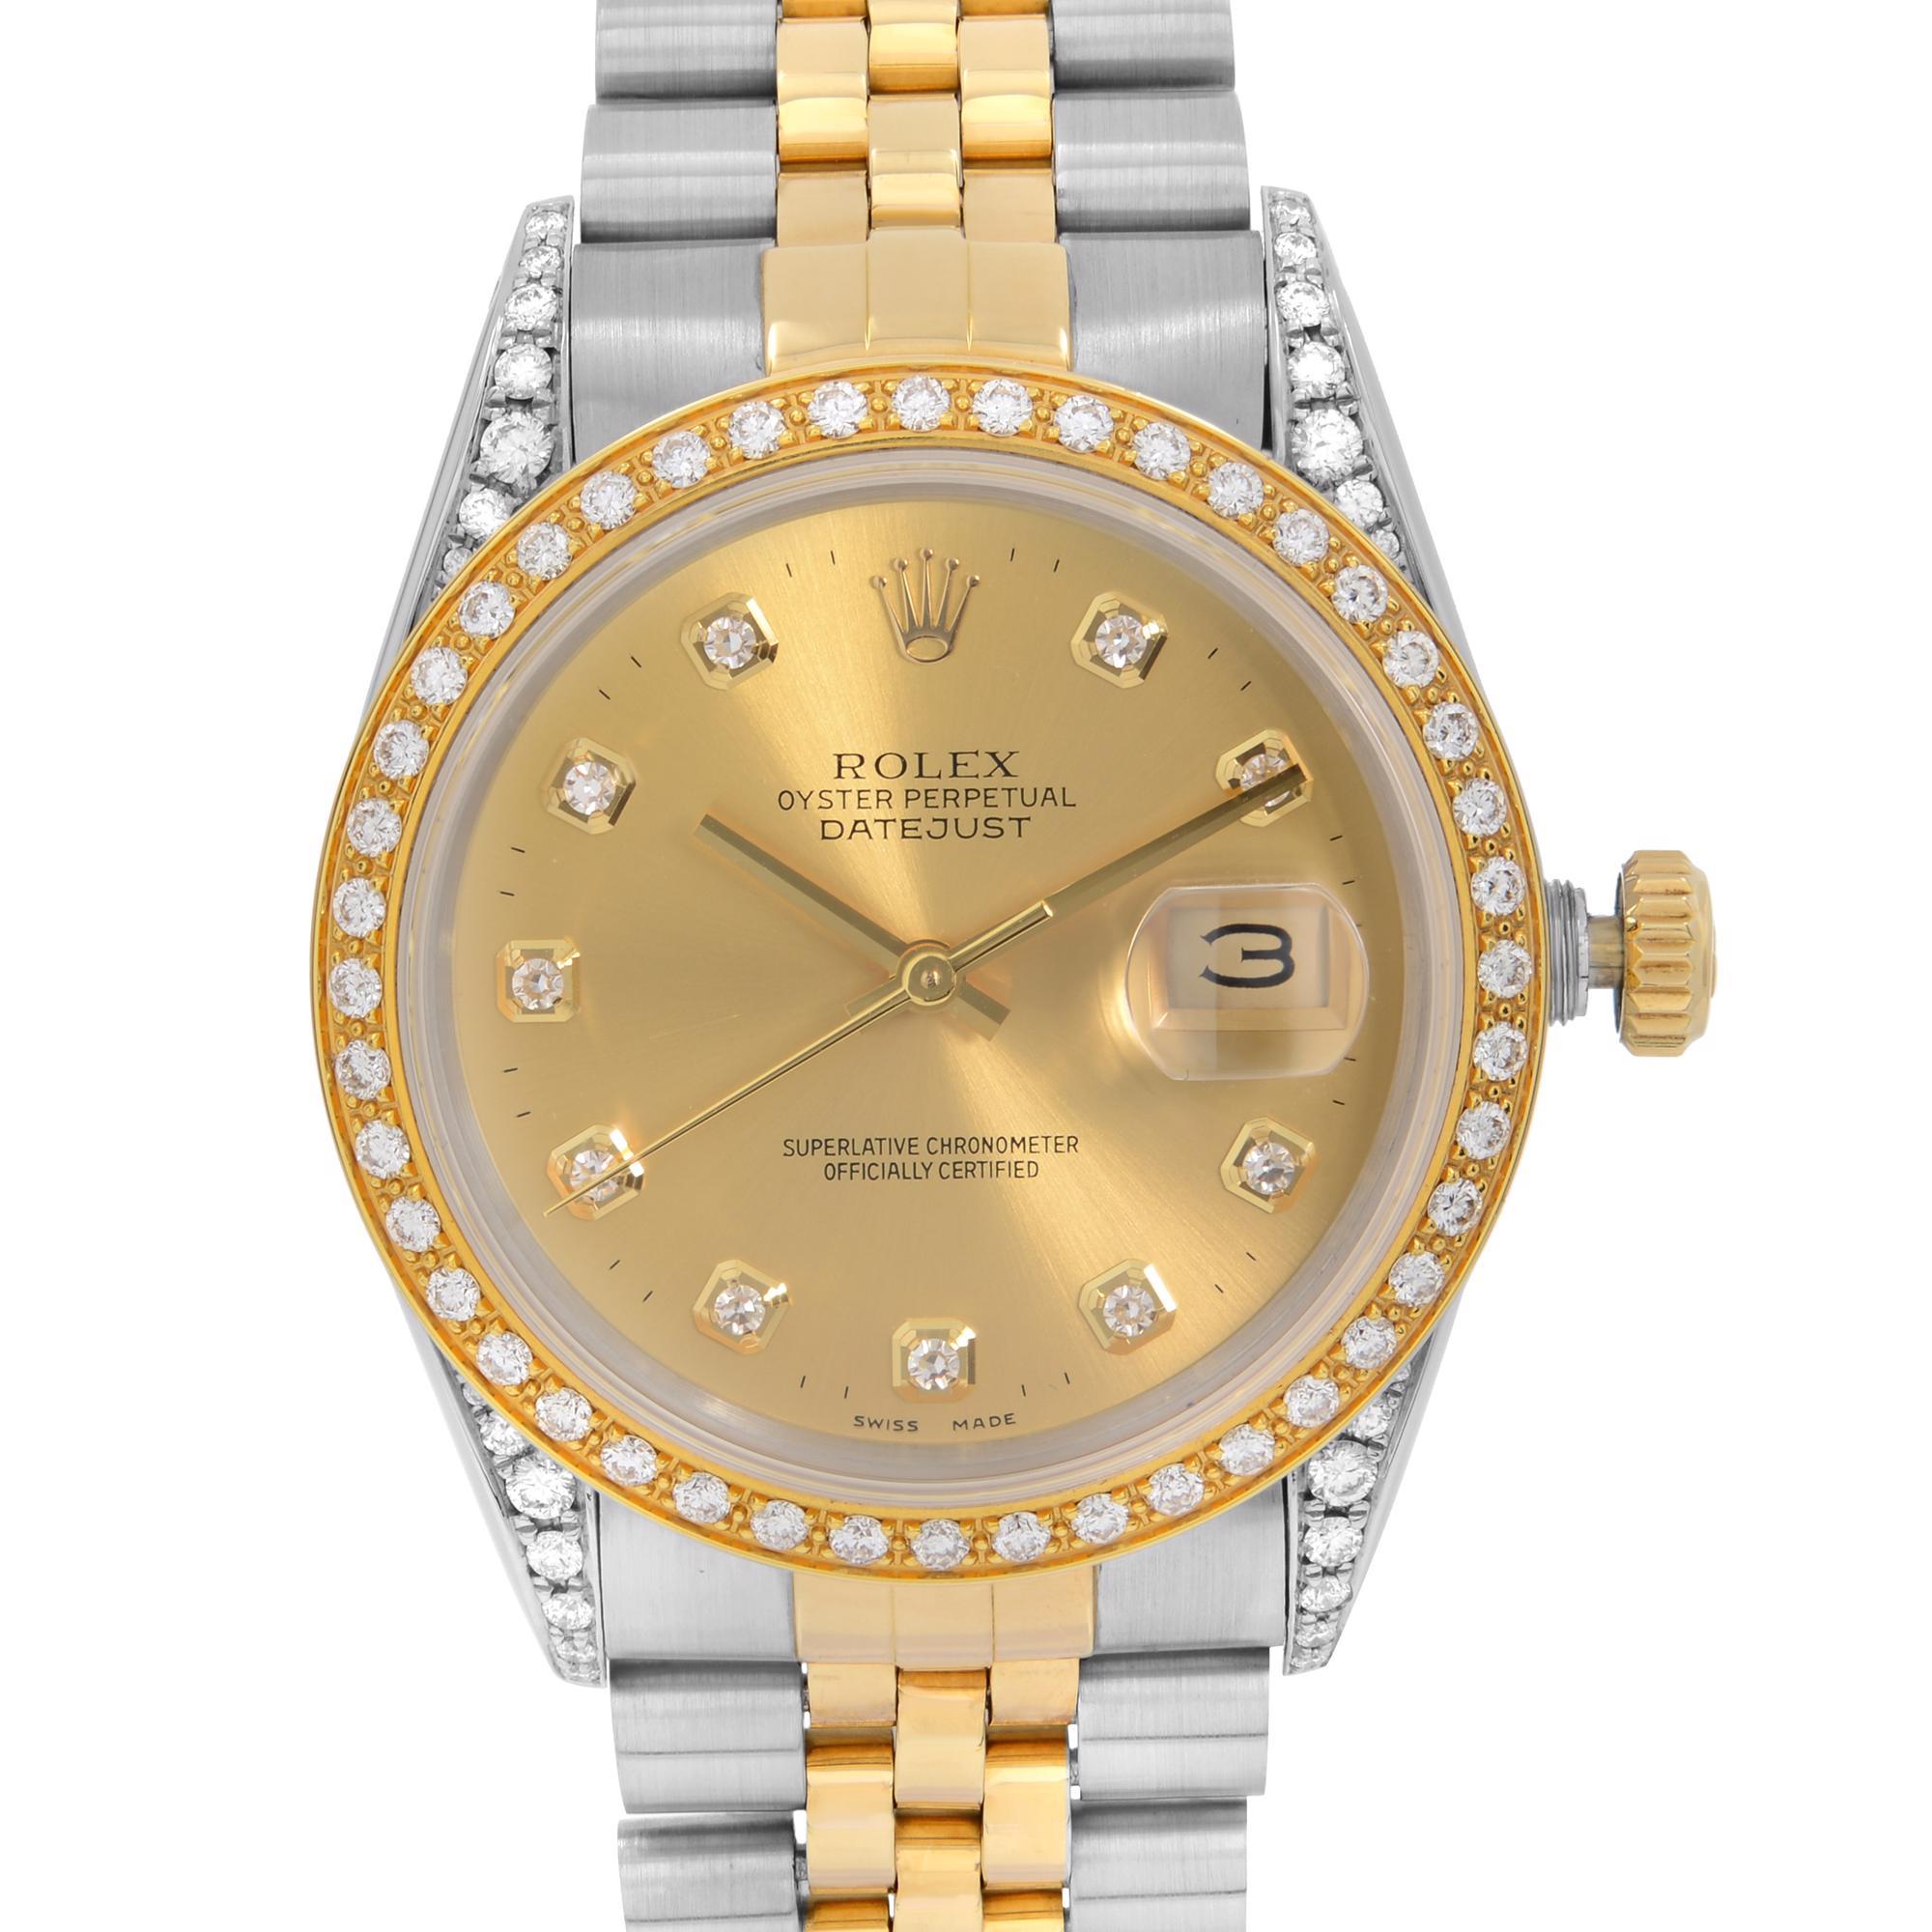 Pre-owned Rolex Datejust 36mm Custom Diamond Bezel and Custom Champagne Dial Men's Automatic Watch 16013. The watch was Produced in 1986.  The band Have moderate slack. Lugs have Custom Diamond as in pictures. This beautiful time-piece is powered by